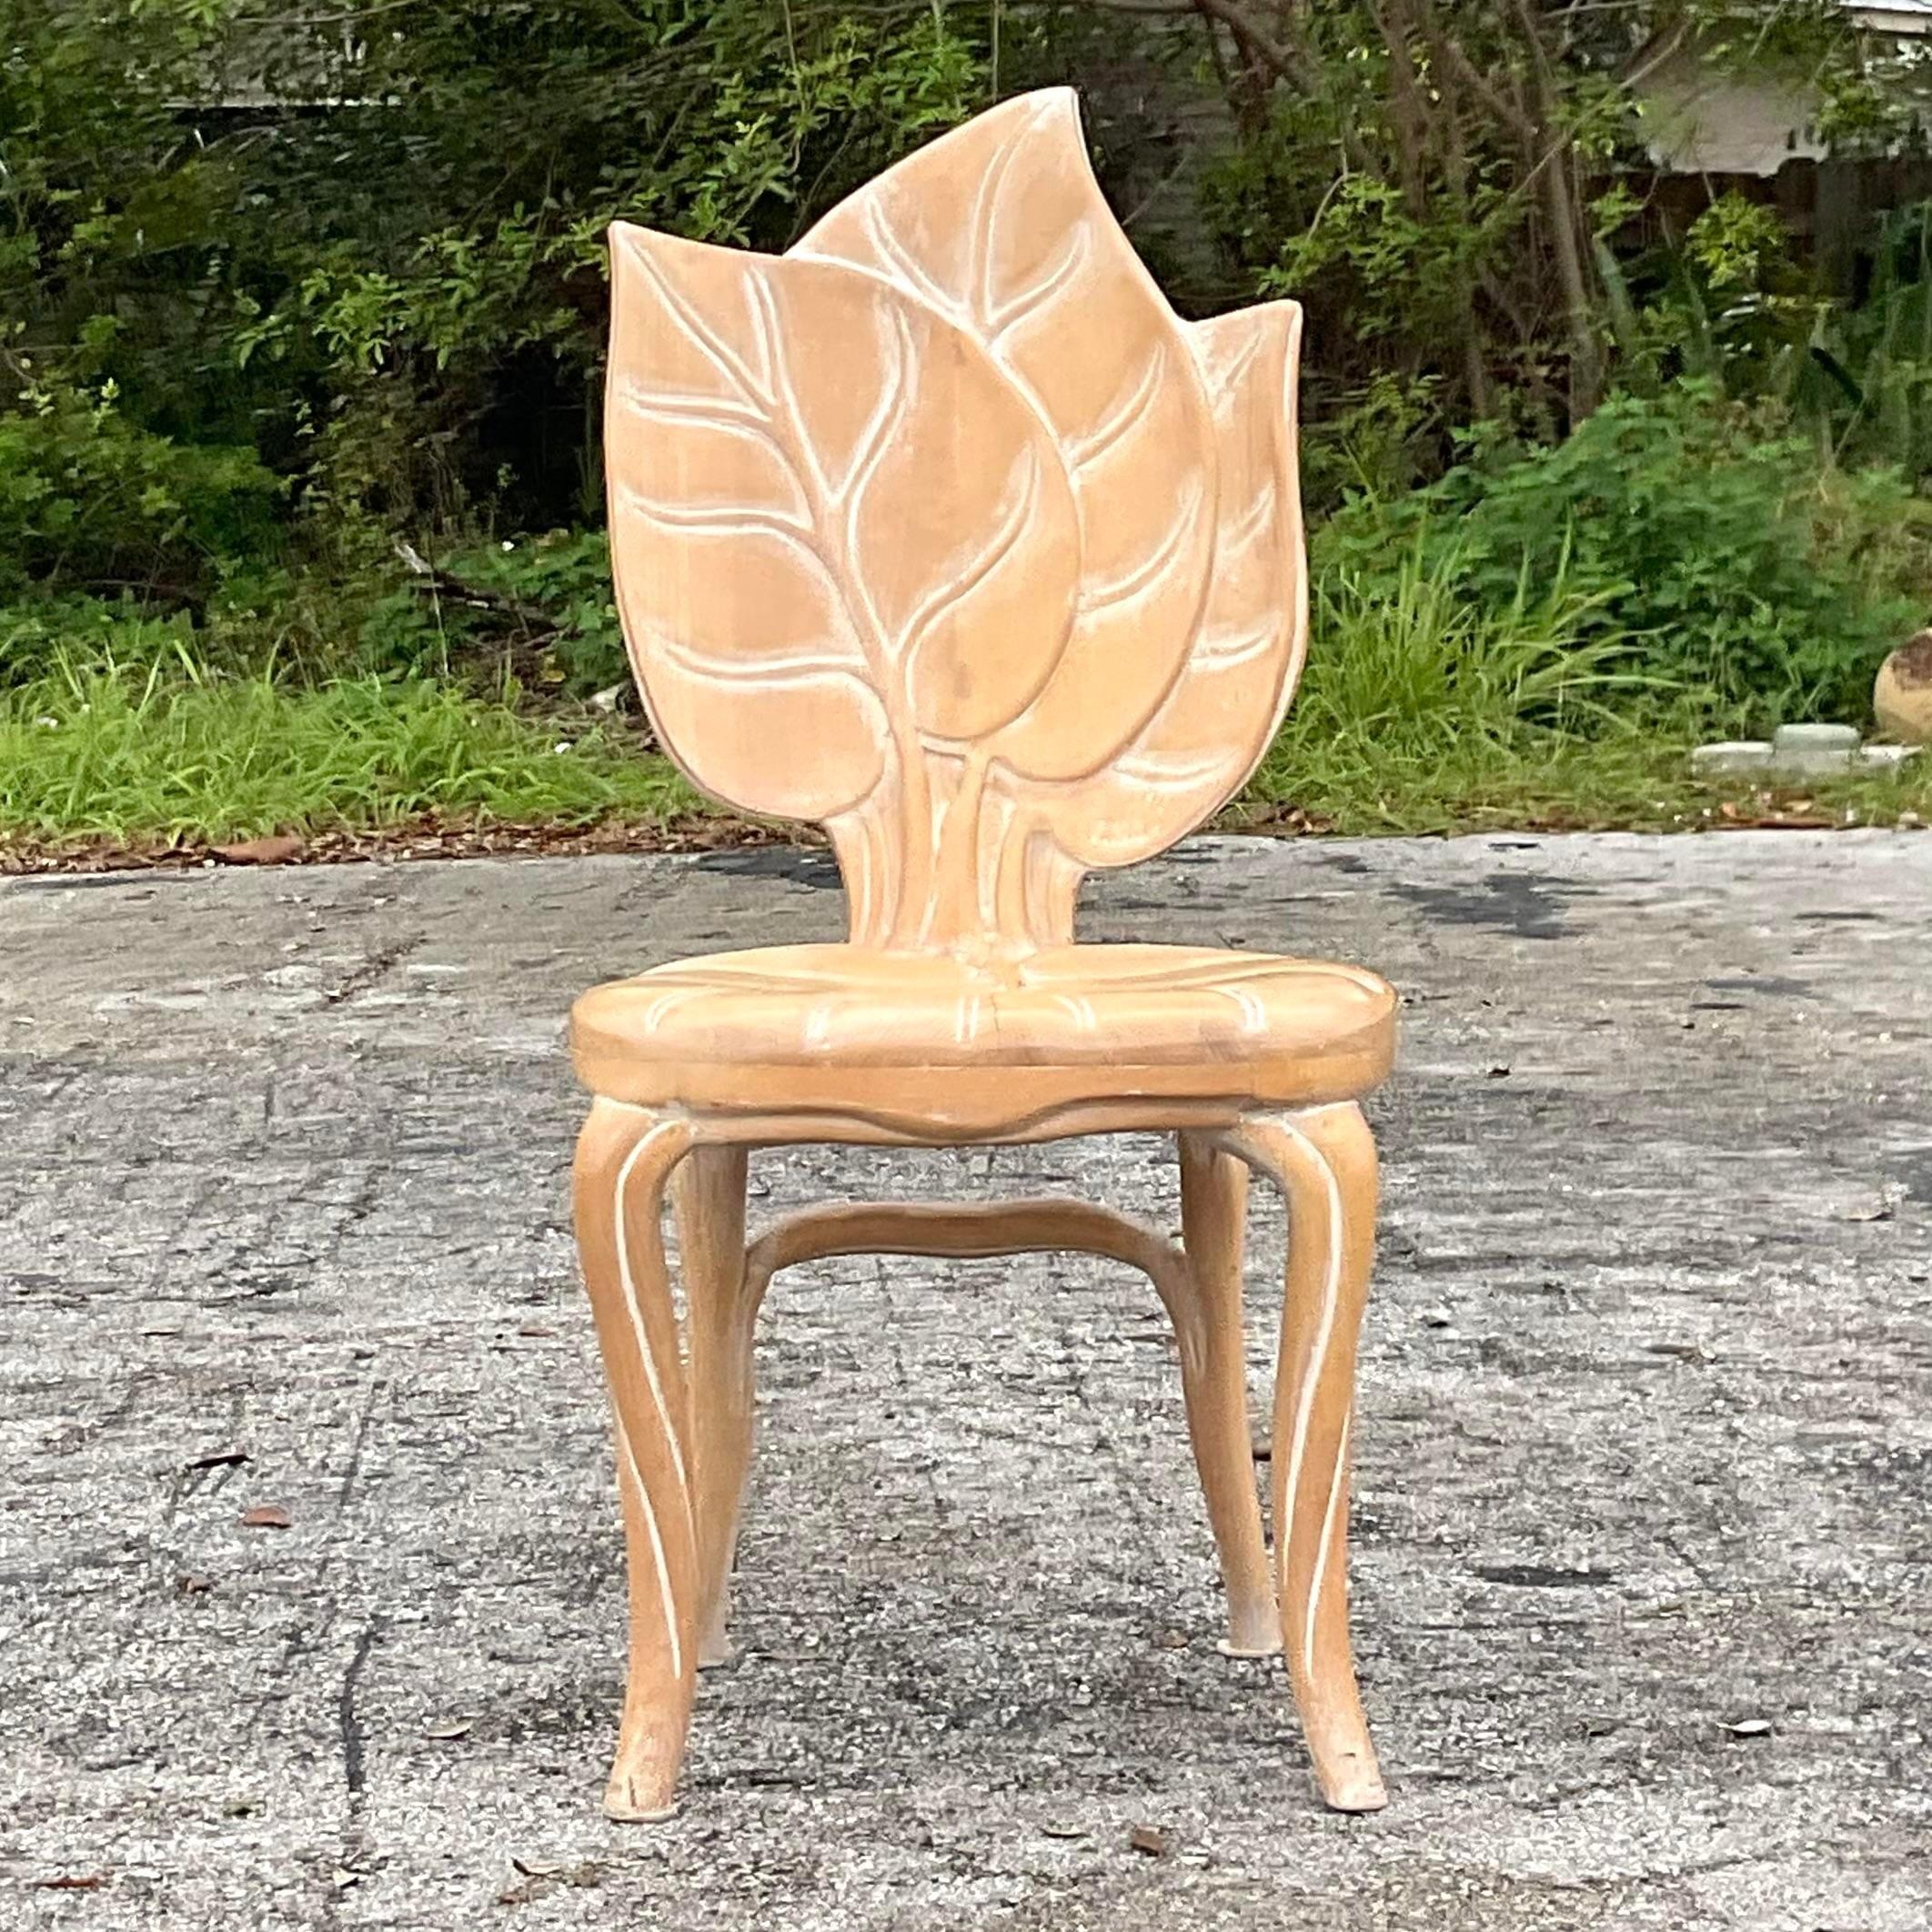 A fantastic vintage Boho hand carved leaf chair. Done in the manner of Bartolozzi and Maioli. Beautiful attention to detail and a light washed finish. Acquired from a Palm Beach estate.